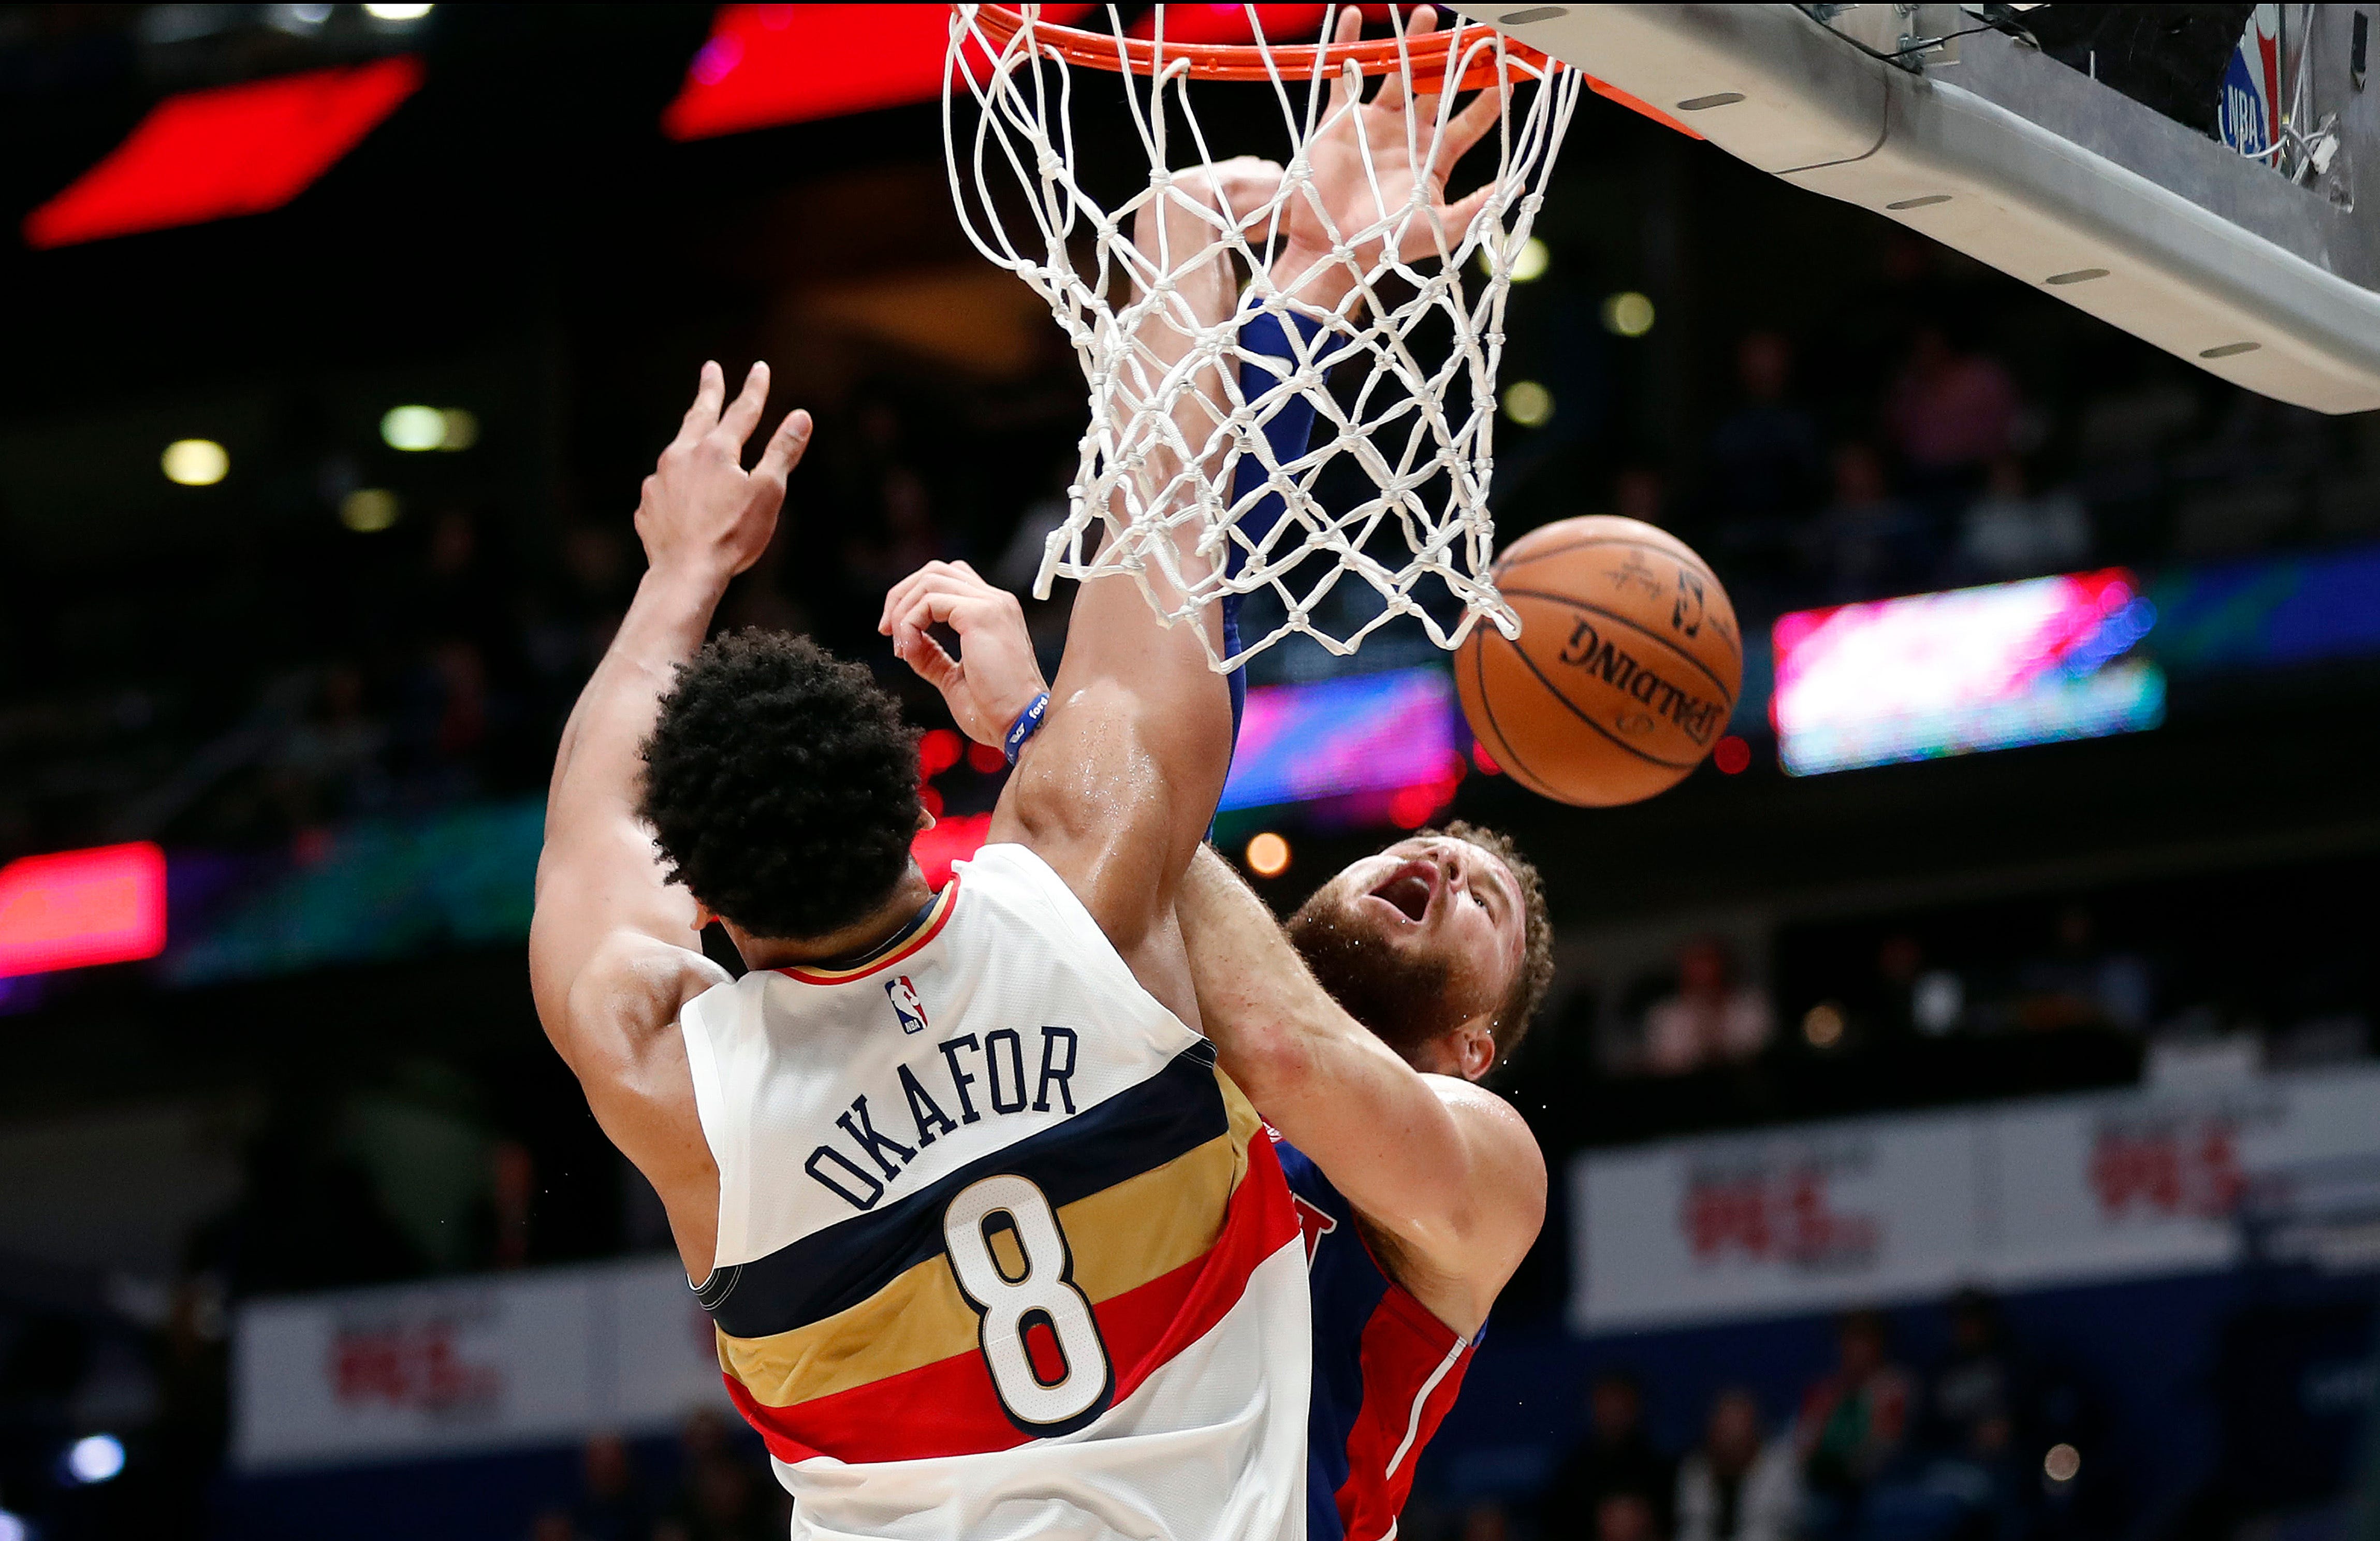 Detroit Pistons forward Blake Griffin is blocked by New Orleans Pelicans center Jahlil Okafor (8) as he goes to the basket in the first half in New Orleans, Wednesday, Jan. 23, 2019.